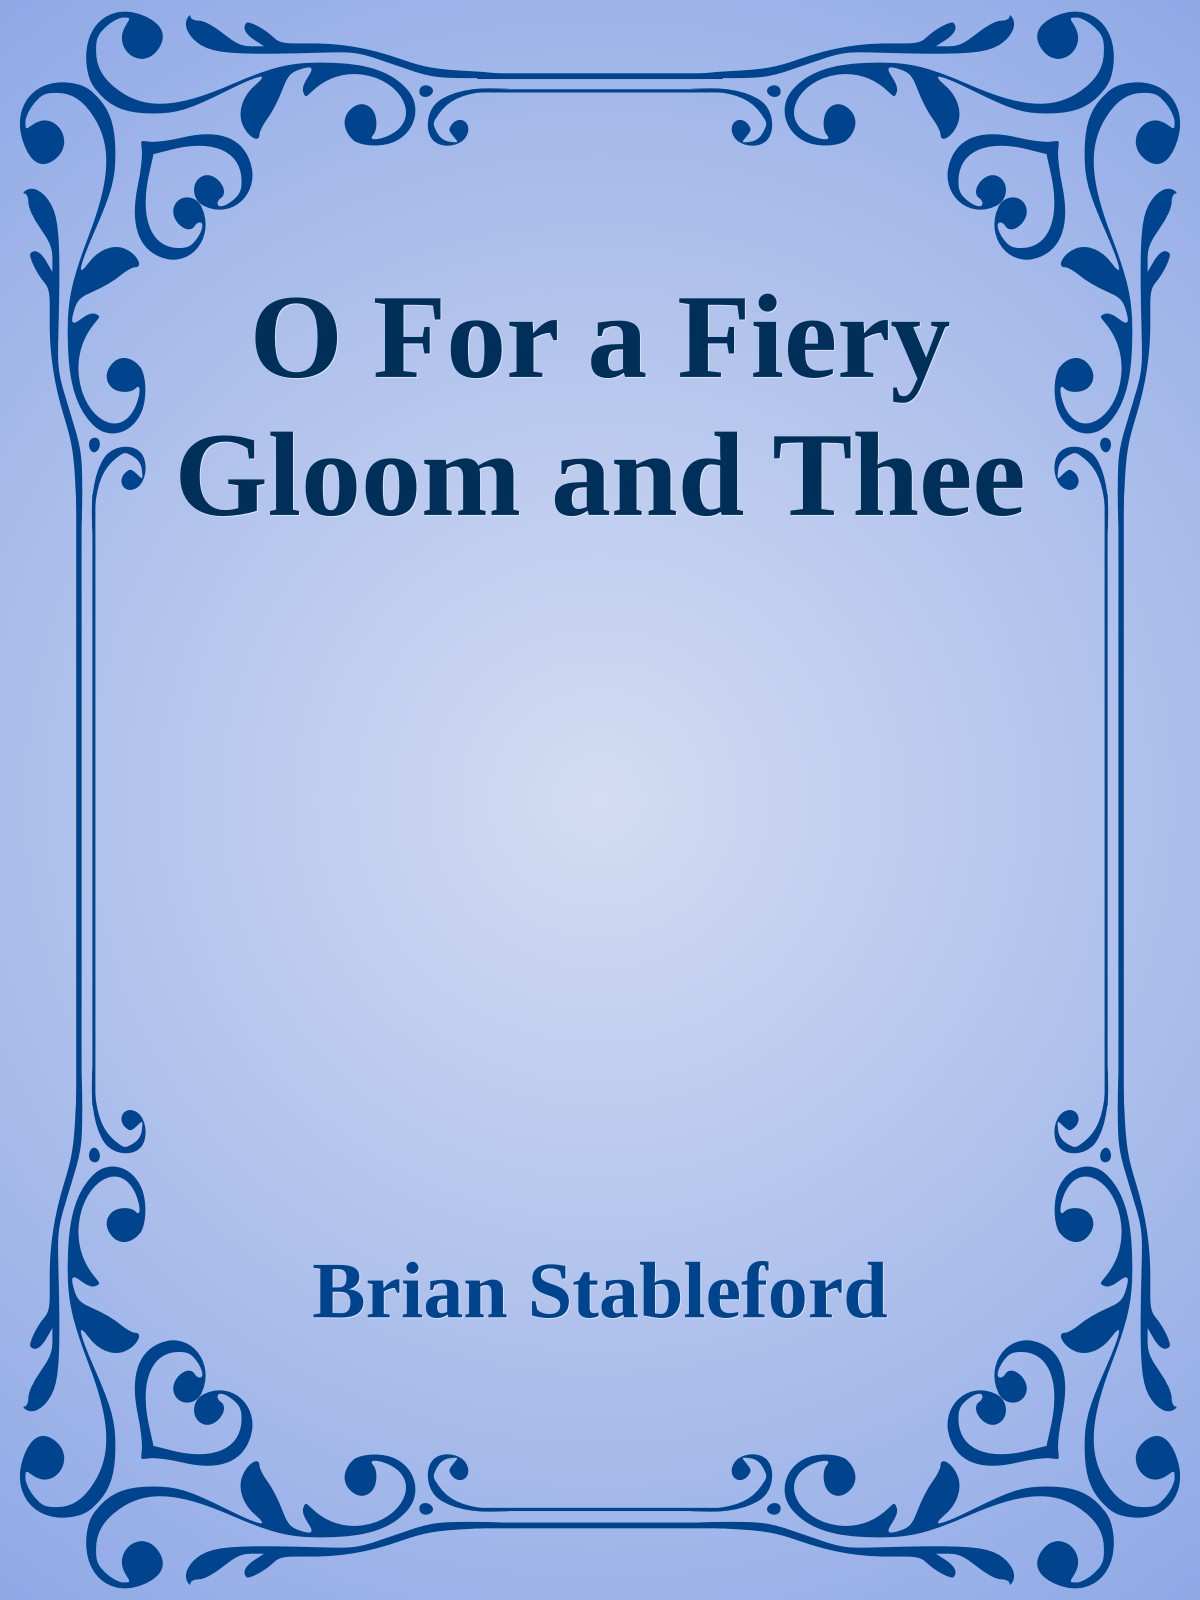 O For a Fiery Gloom and Thee